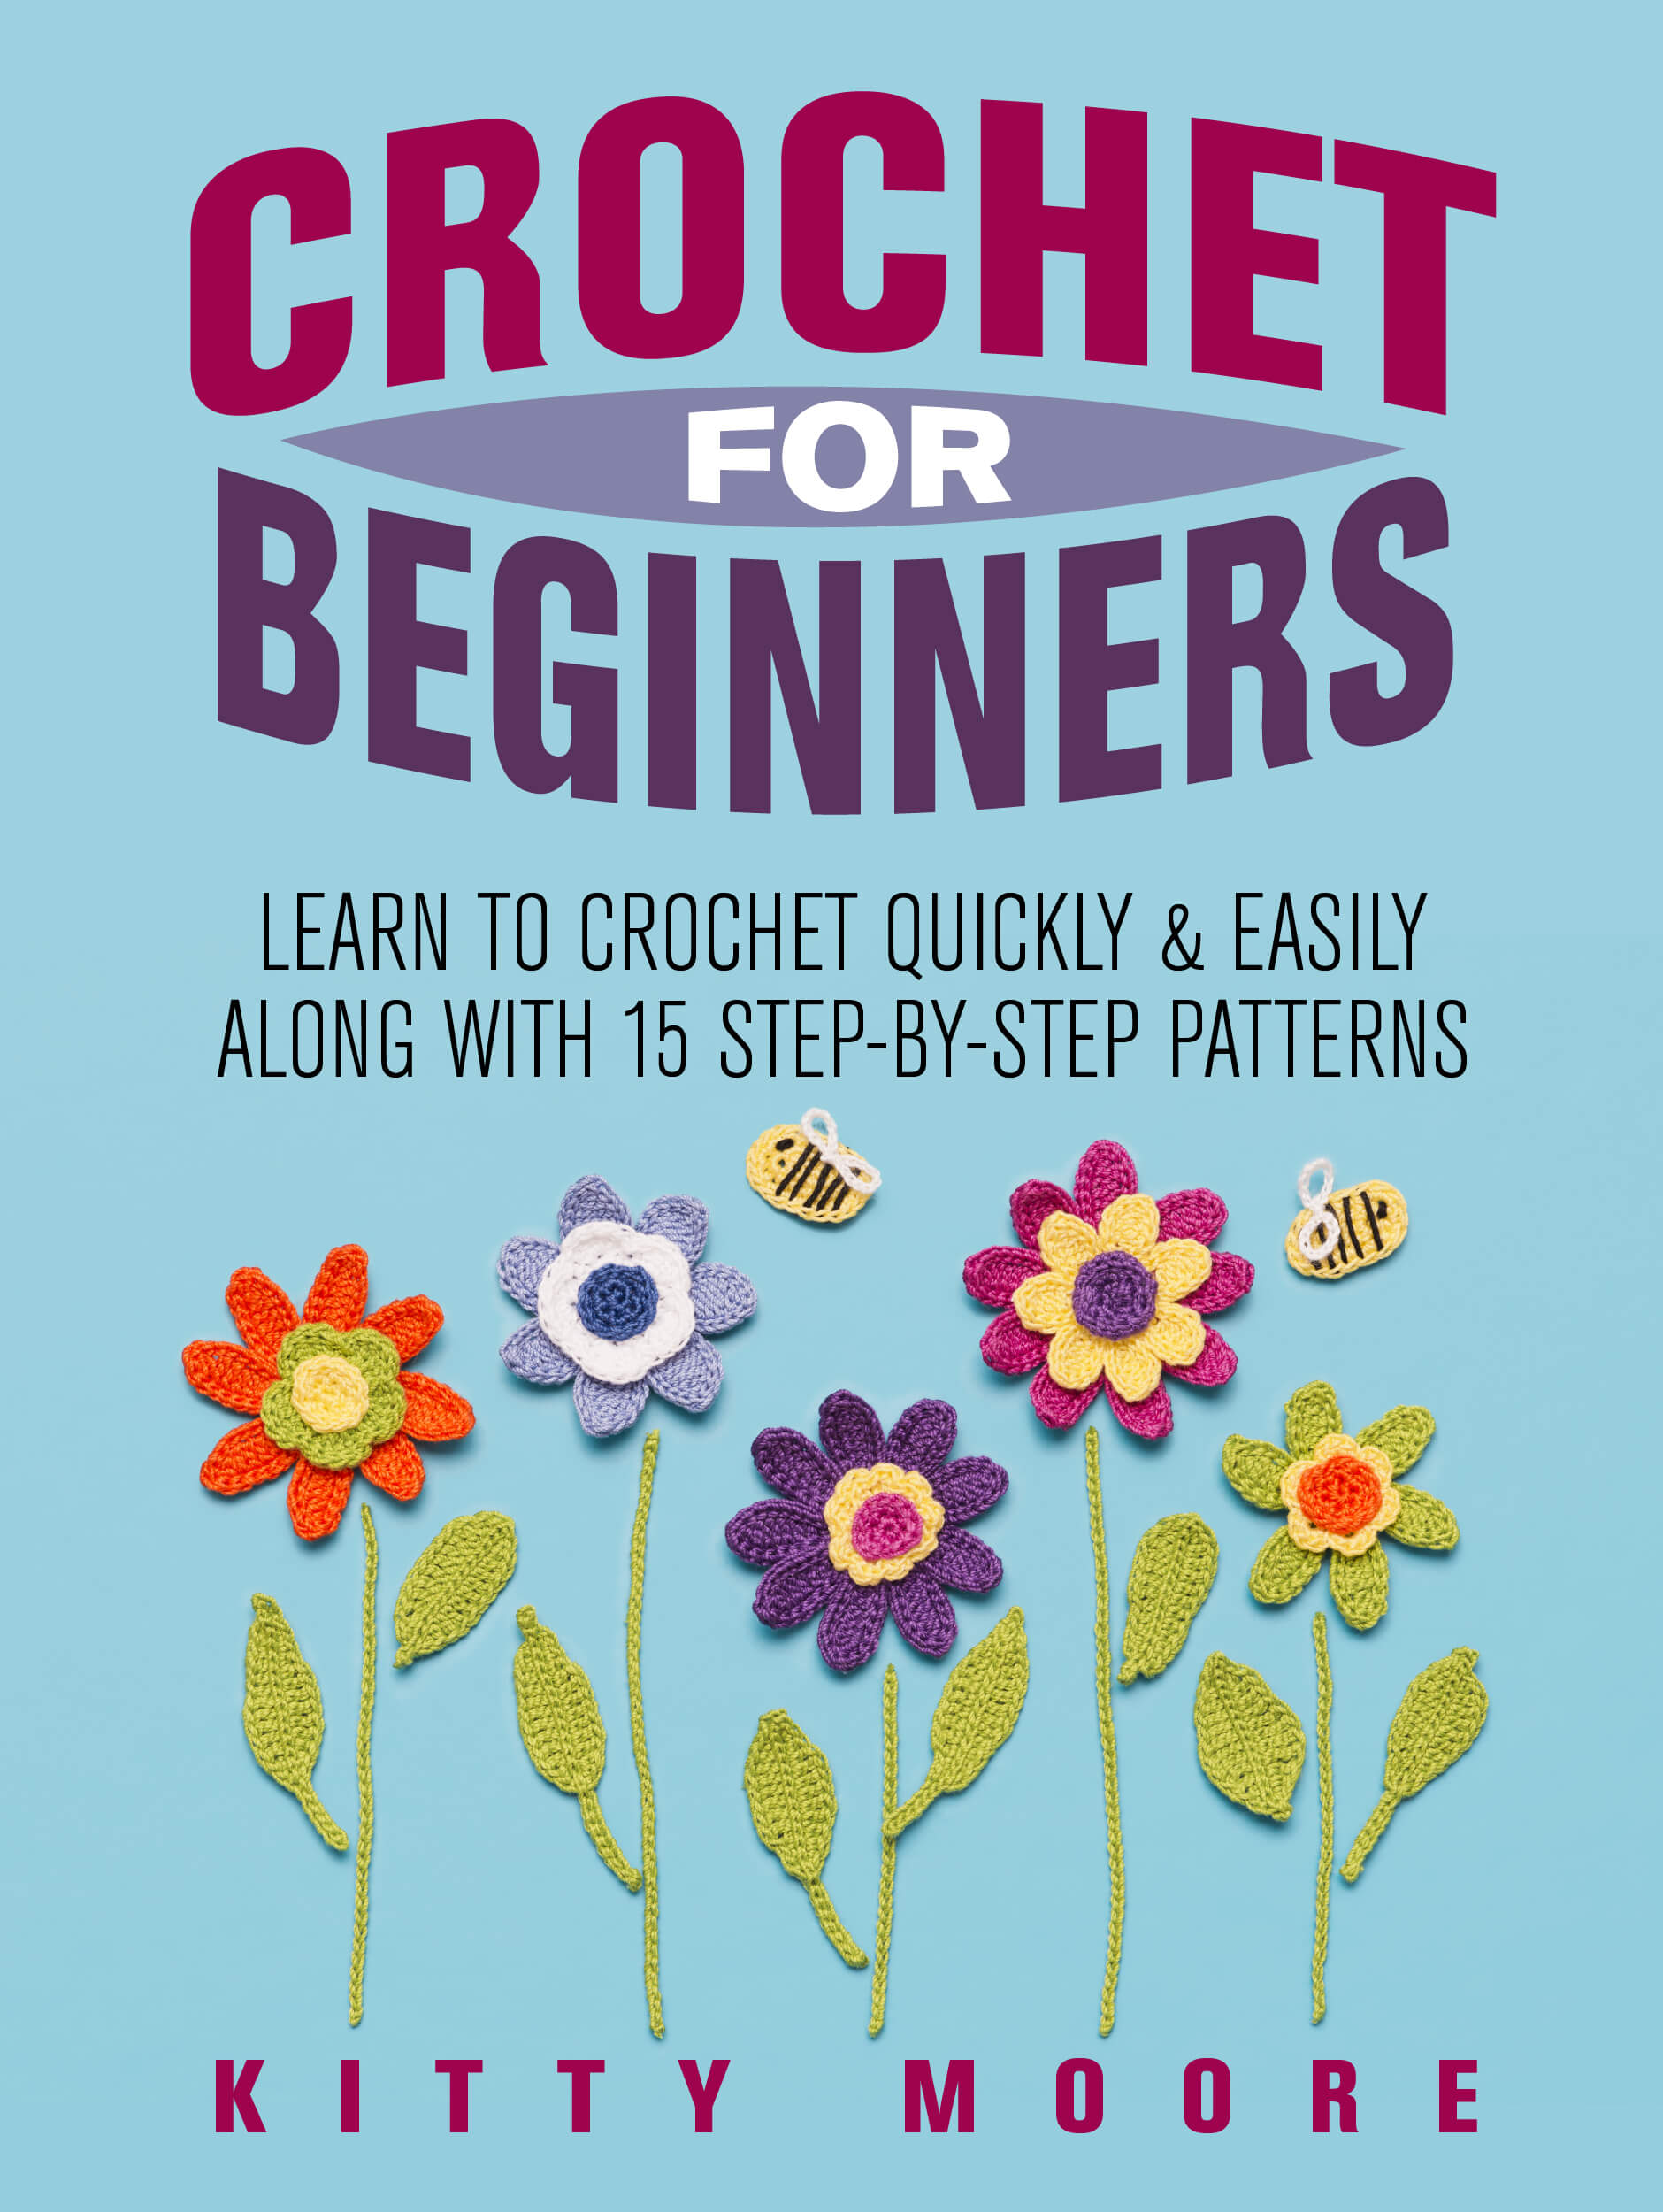 FREE: Crochet For Beginners (2nd Edition): Learn To Crochet Quickly & Easily Along With 15 Step-By-Step Patterns by Kitty Moore